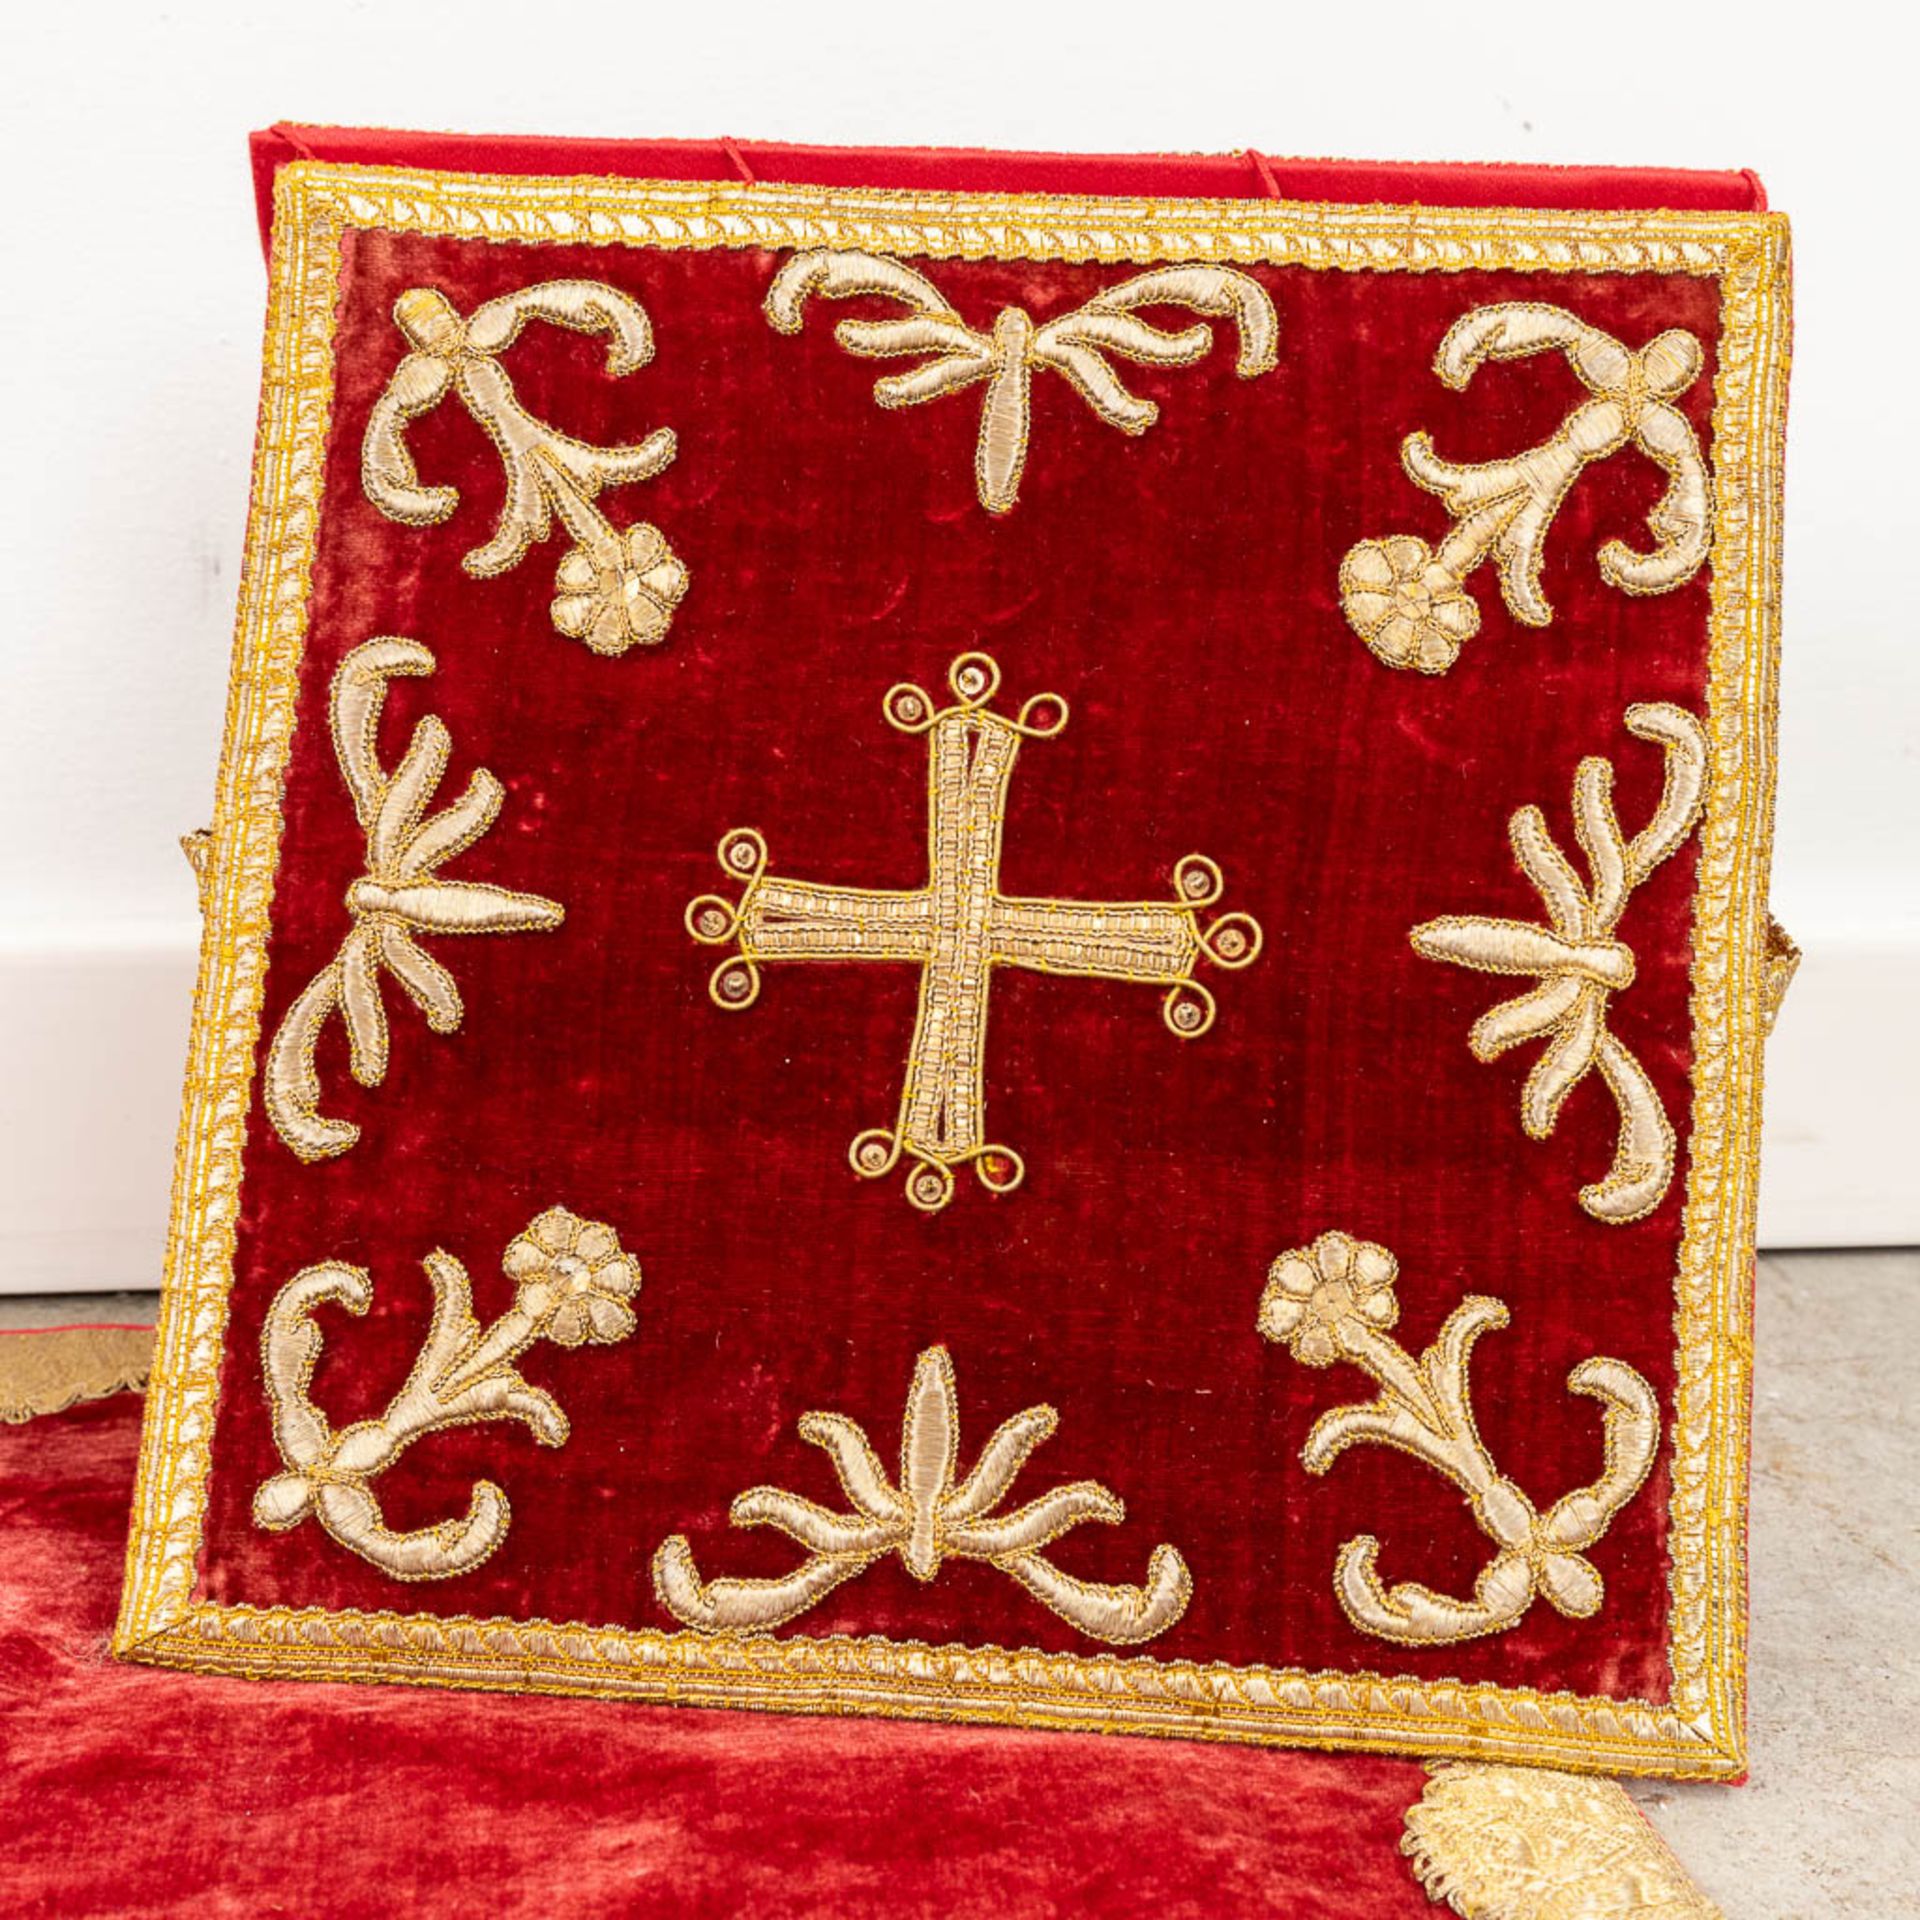 An assembled collection of liturgical fabric items, Chalice veil, Bursa, altar veil. 20ste eeuw. - Image 9 of 9